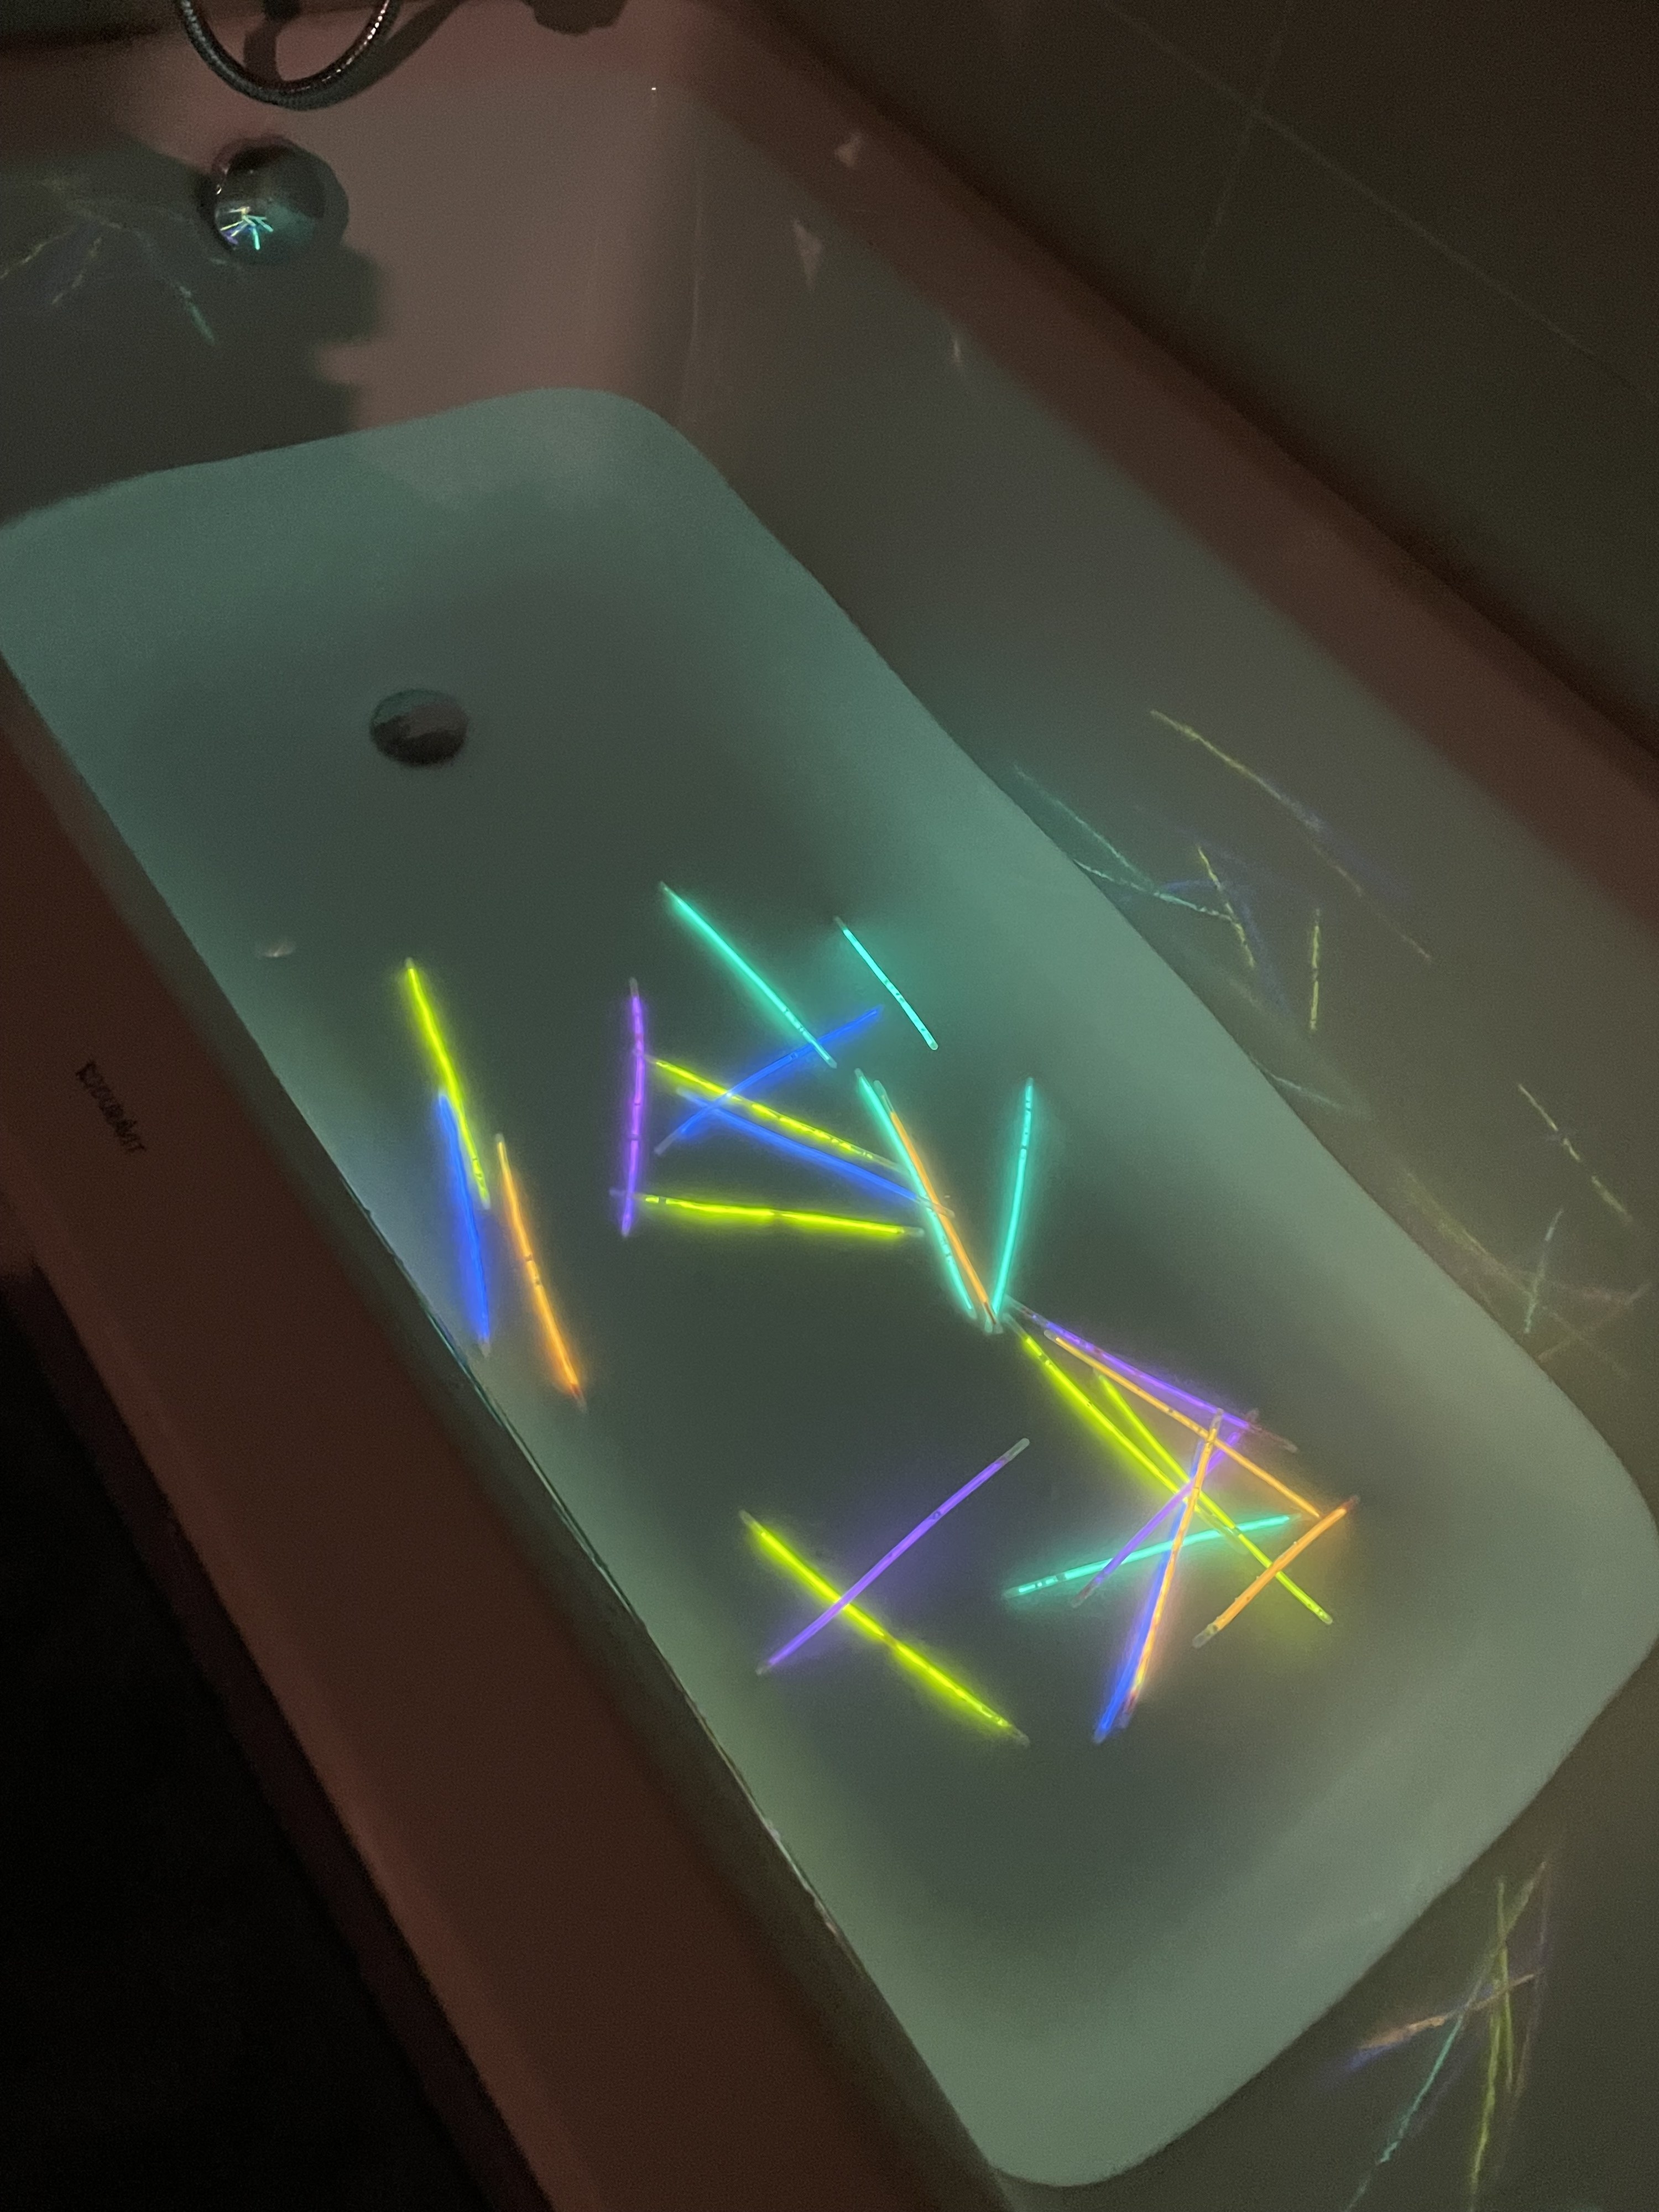 A photo of the glow sticks in the bath tub